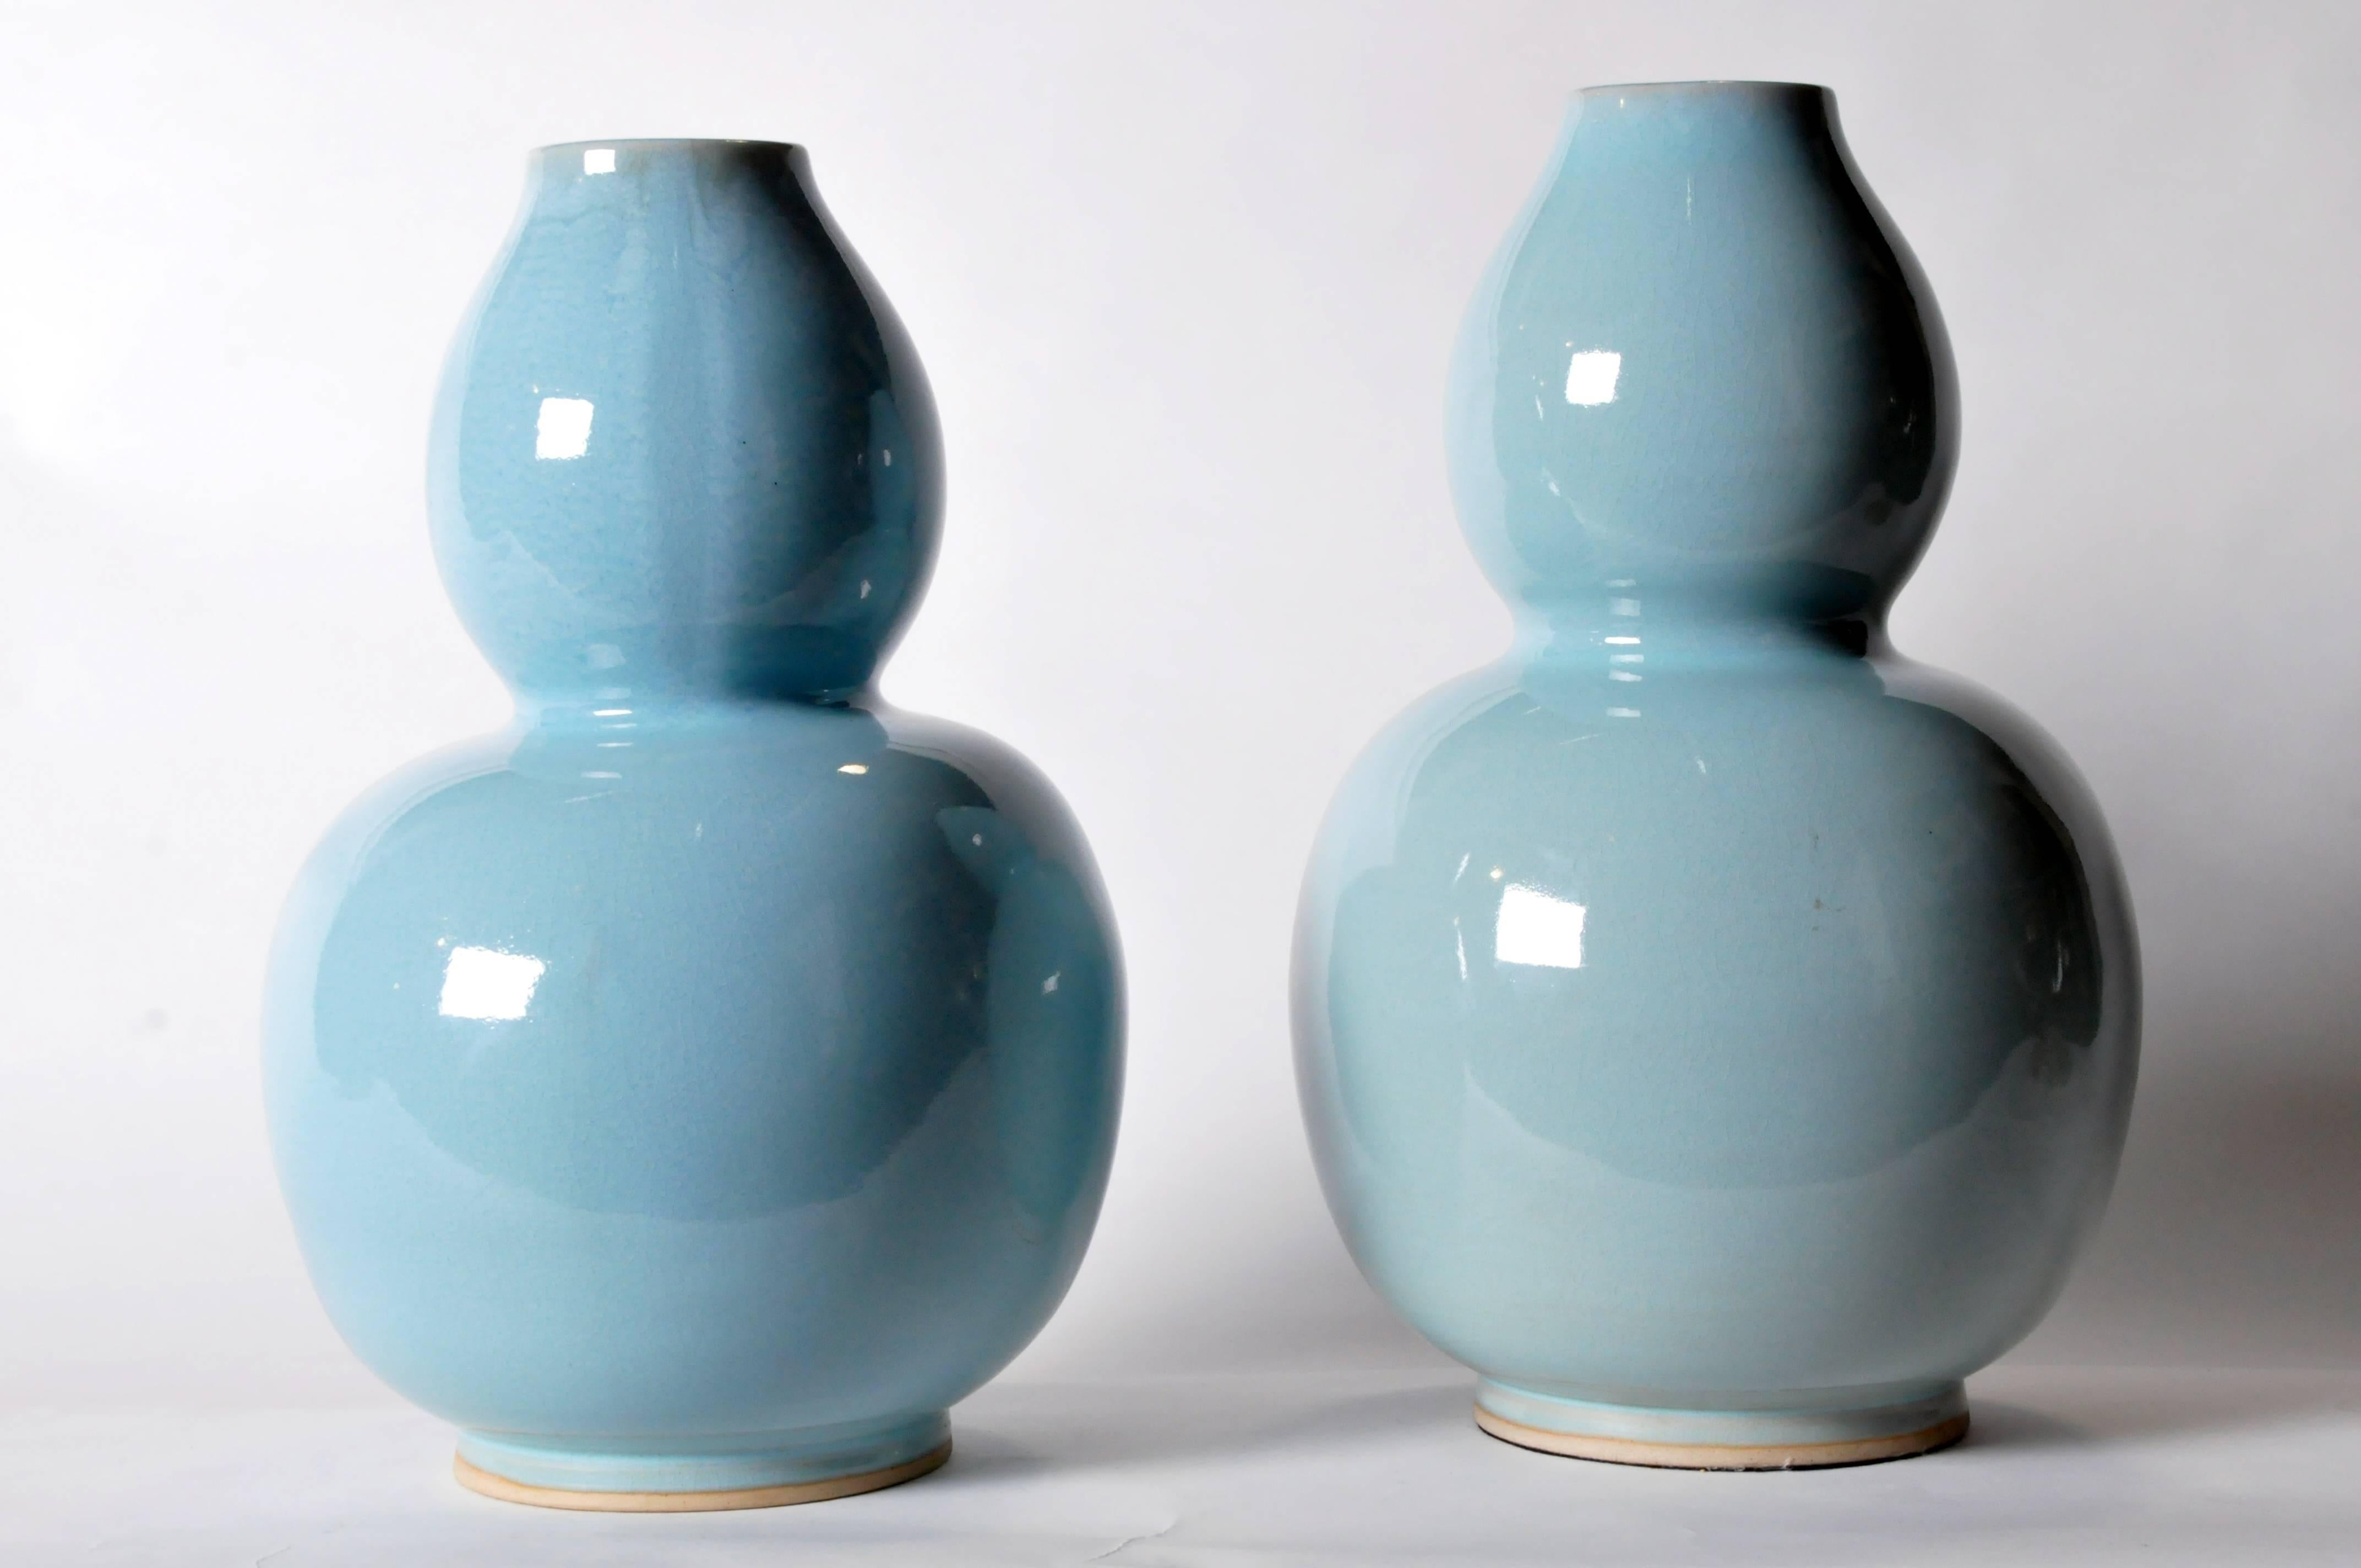 Dramatic on its own or paired with another, this curvaceous vessel is handmade and features a beautiful light blue glaze with a high-gloss crackle finish. Shown in a pair for comparison and styling; each is sold separately and has its own unique